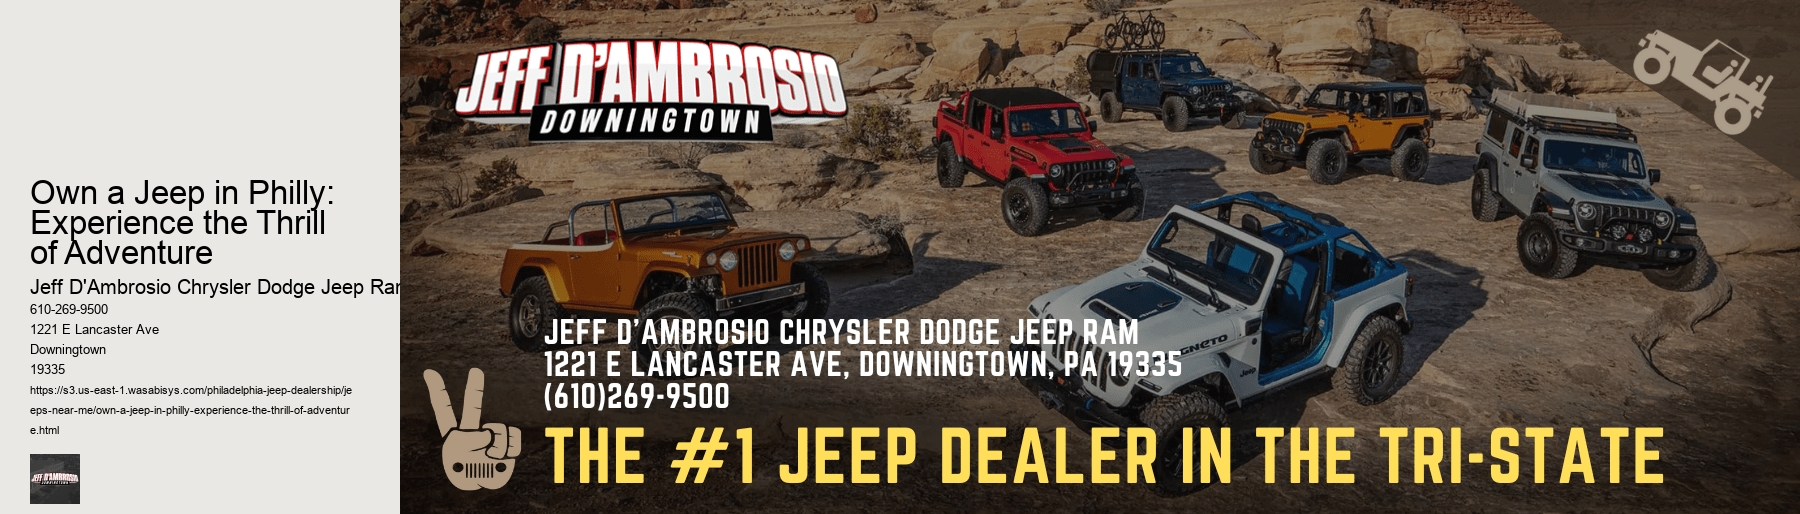 Own a Jeep in Philly: Experience the Thrill of Adventure